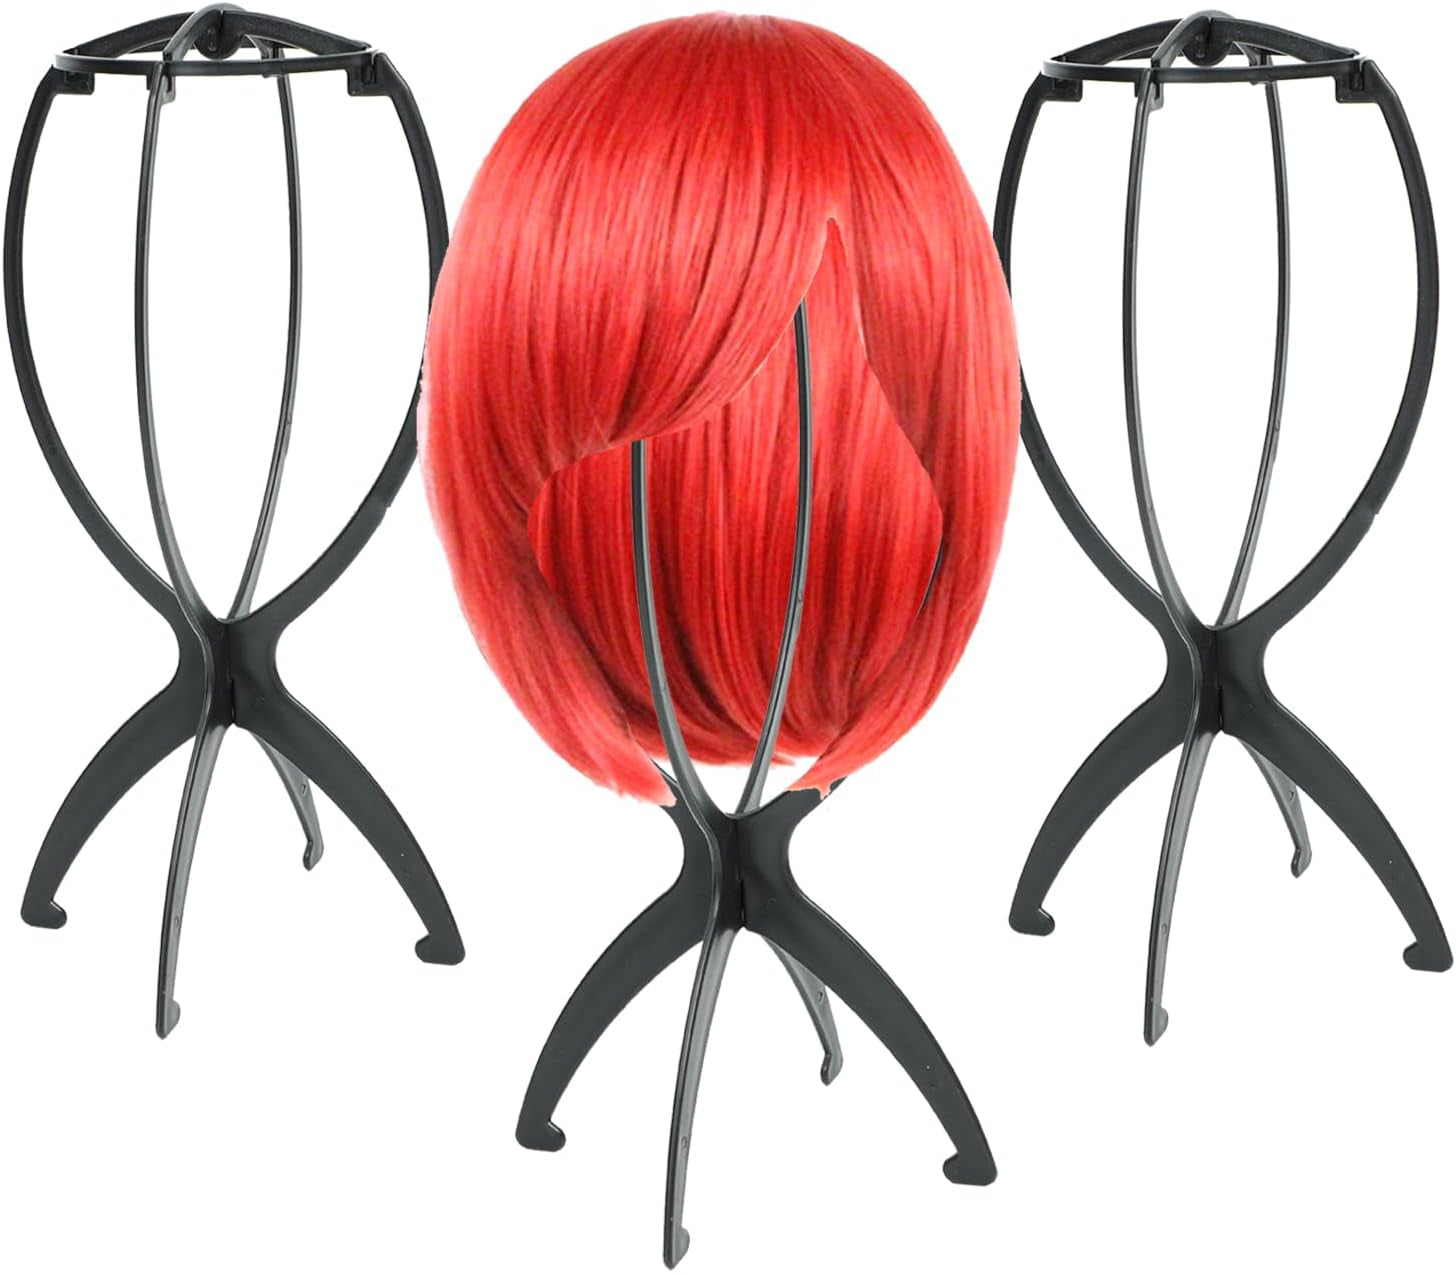 3 Pack Wig Stand Holder, Portable Collapsible Wig Holder for Multiple Wigs, Durable Wig Stands for Women Wig Drying Stand Travel Wig Holder Stand Wigs Display Stand Tool (Black)